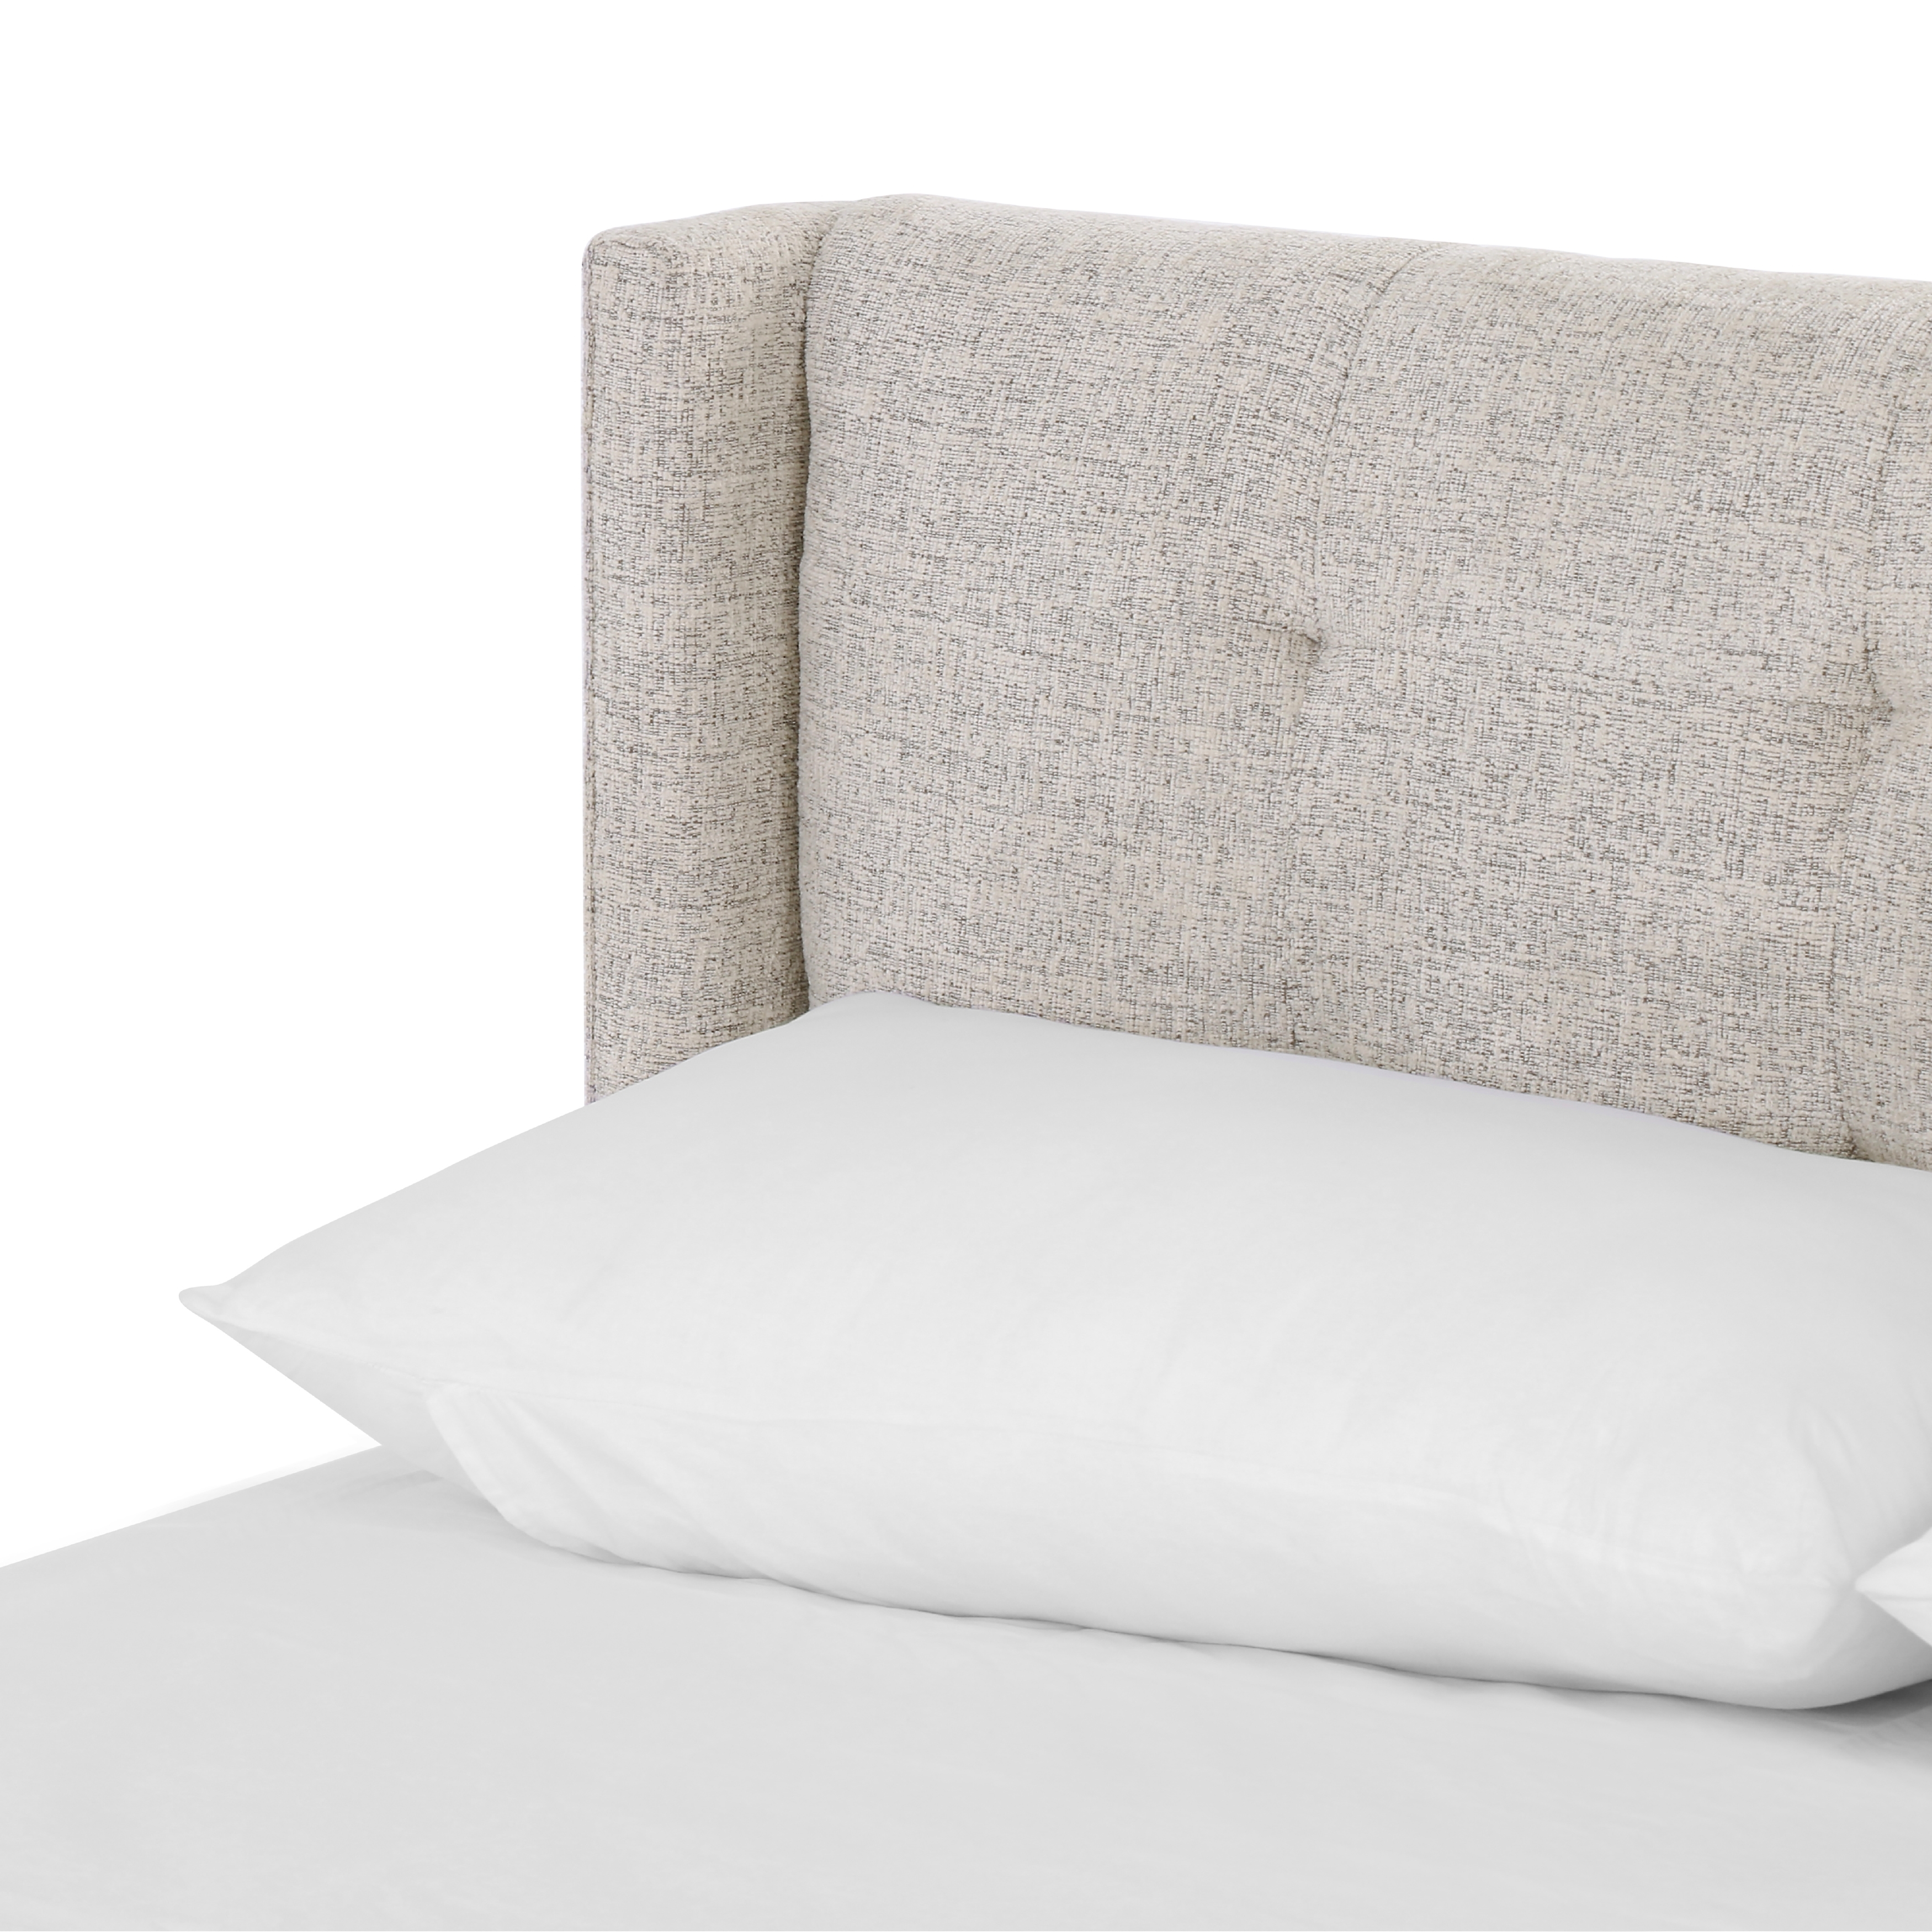 Newhall Bed-Plushtone Linen-Queen - Image 7